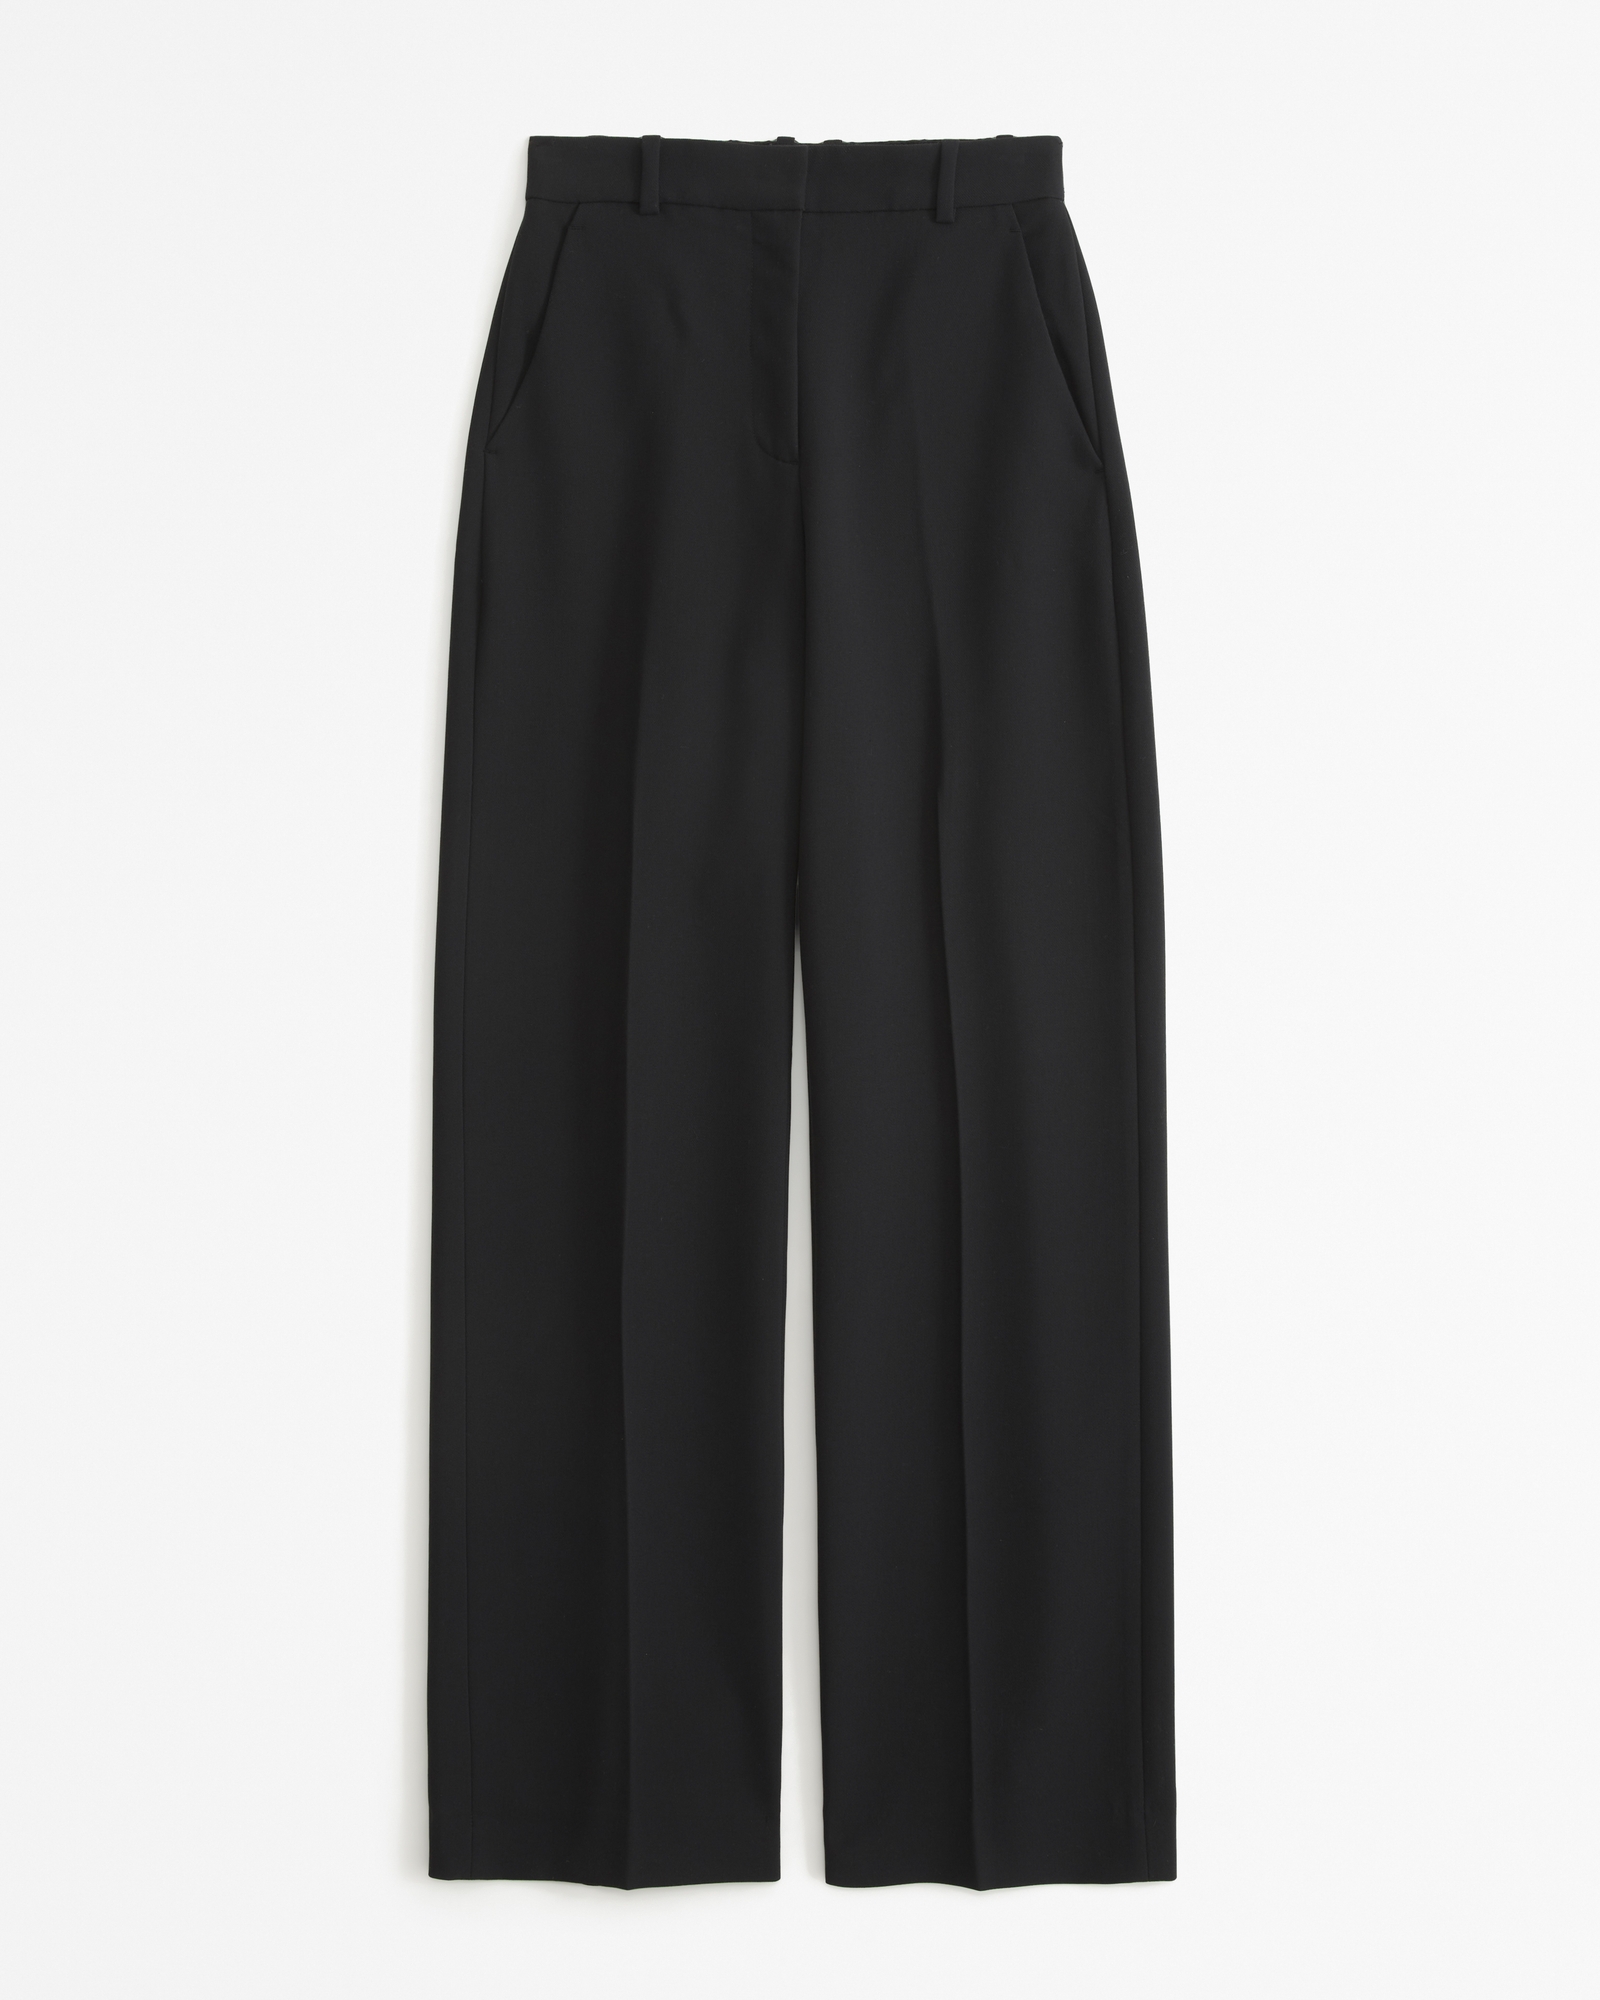 A&F Sloane Tailored Clean Pant